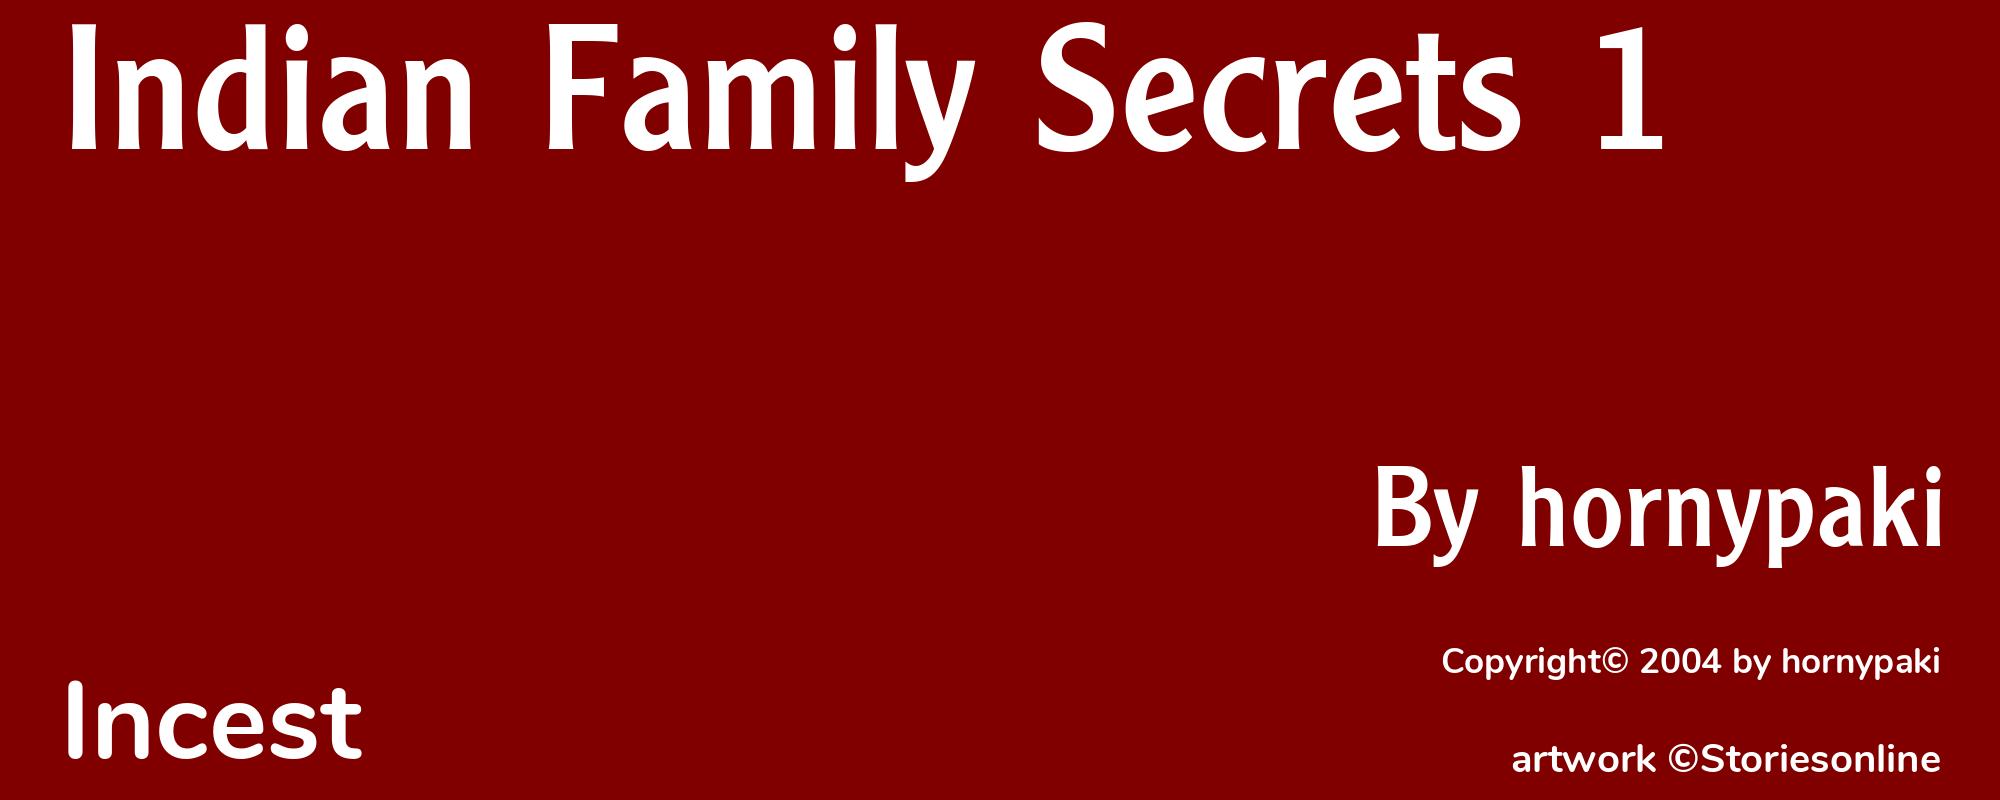 Indian Family Secrets 1 - Cover